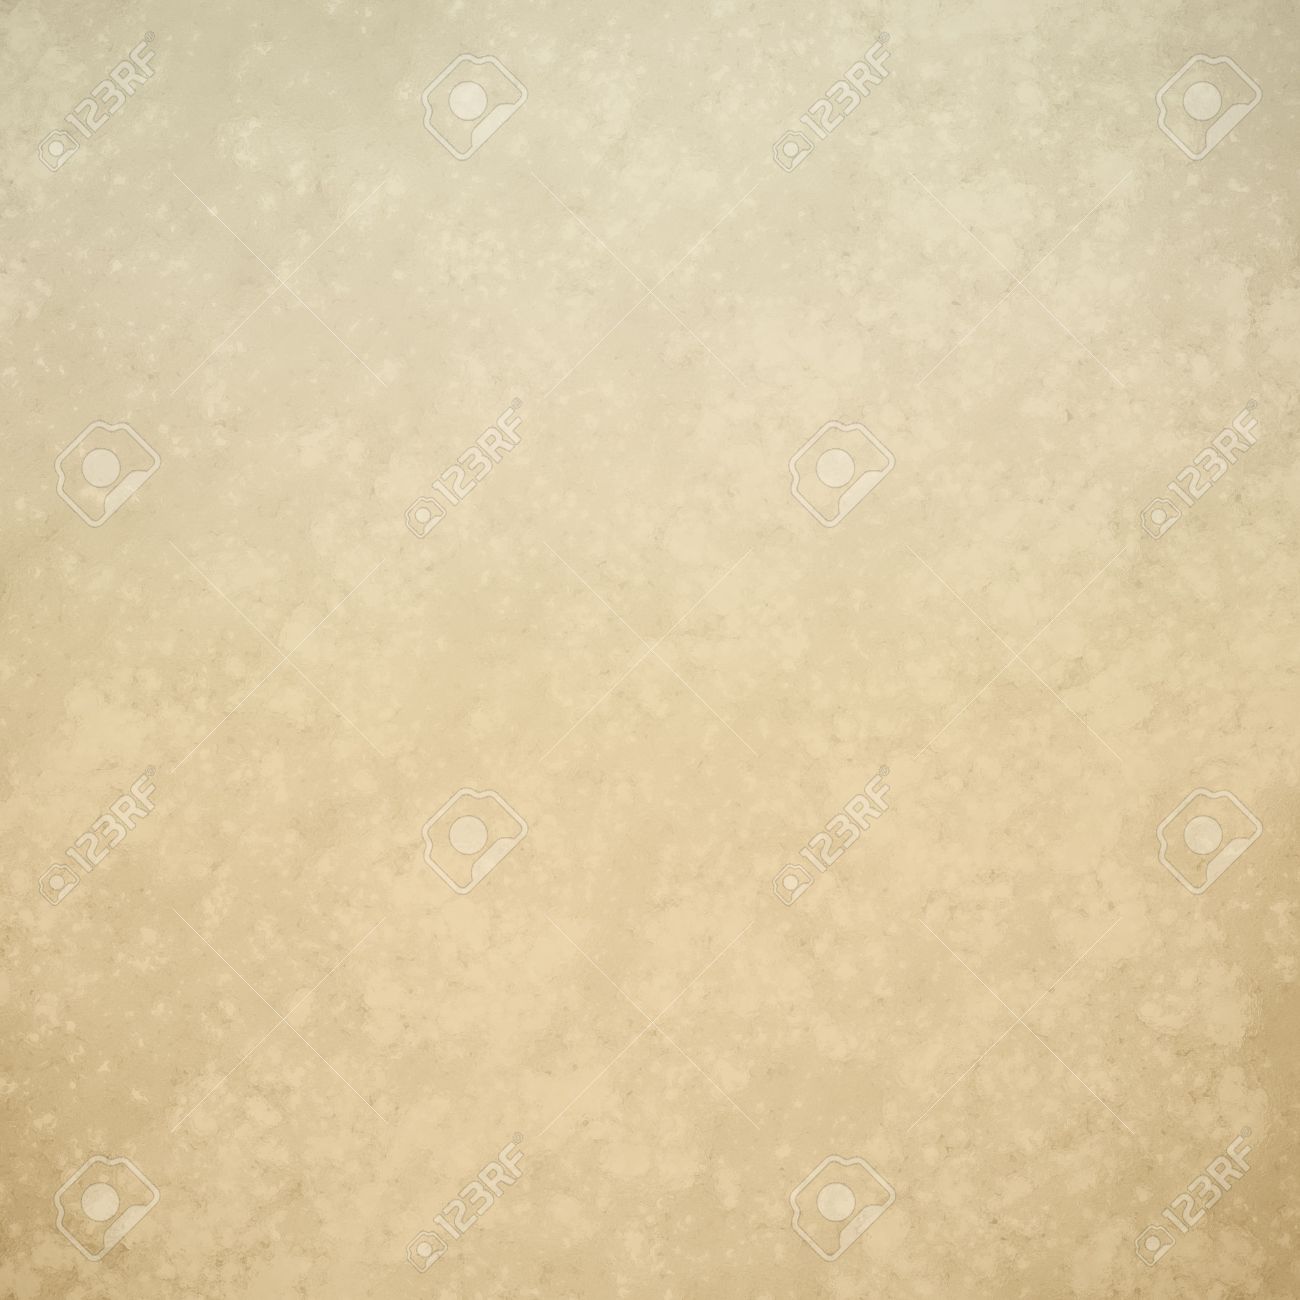 Old Light Brown Paper Or Parchment Off White Vintage Background